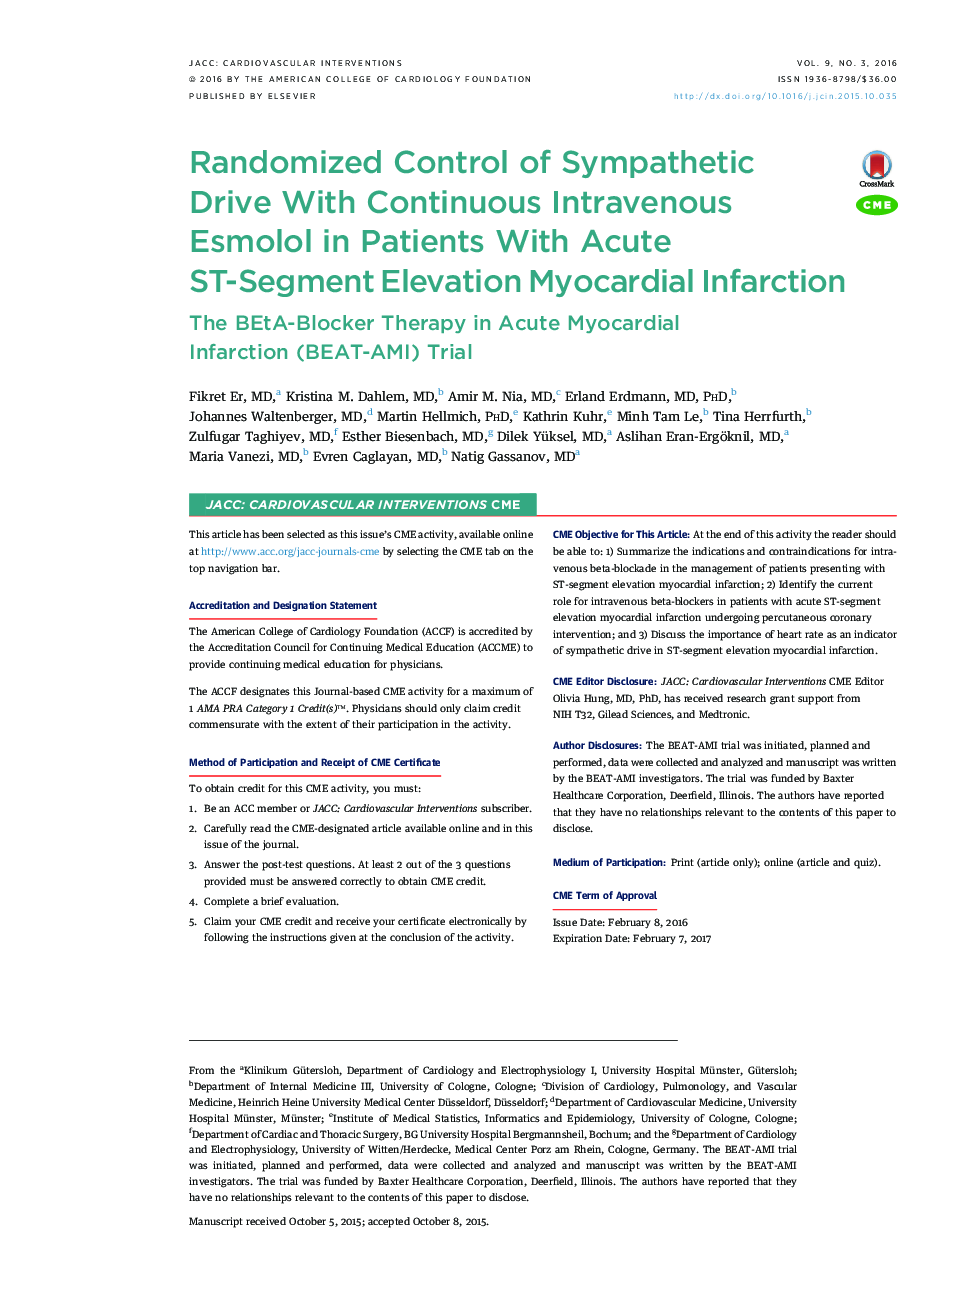 Randomized Control of Sympathetic Drive With Continuous Intravenous Esmolol in Patients With Acute ST-Segment Elevation Myocardial Infarction: The BEtA-Blocker Therapy in Acute Myocardial Infarction (BEAT-AMI) Trial